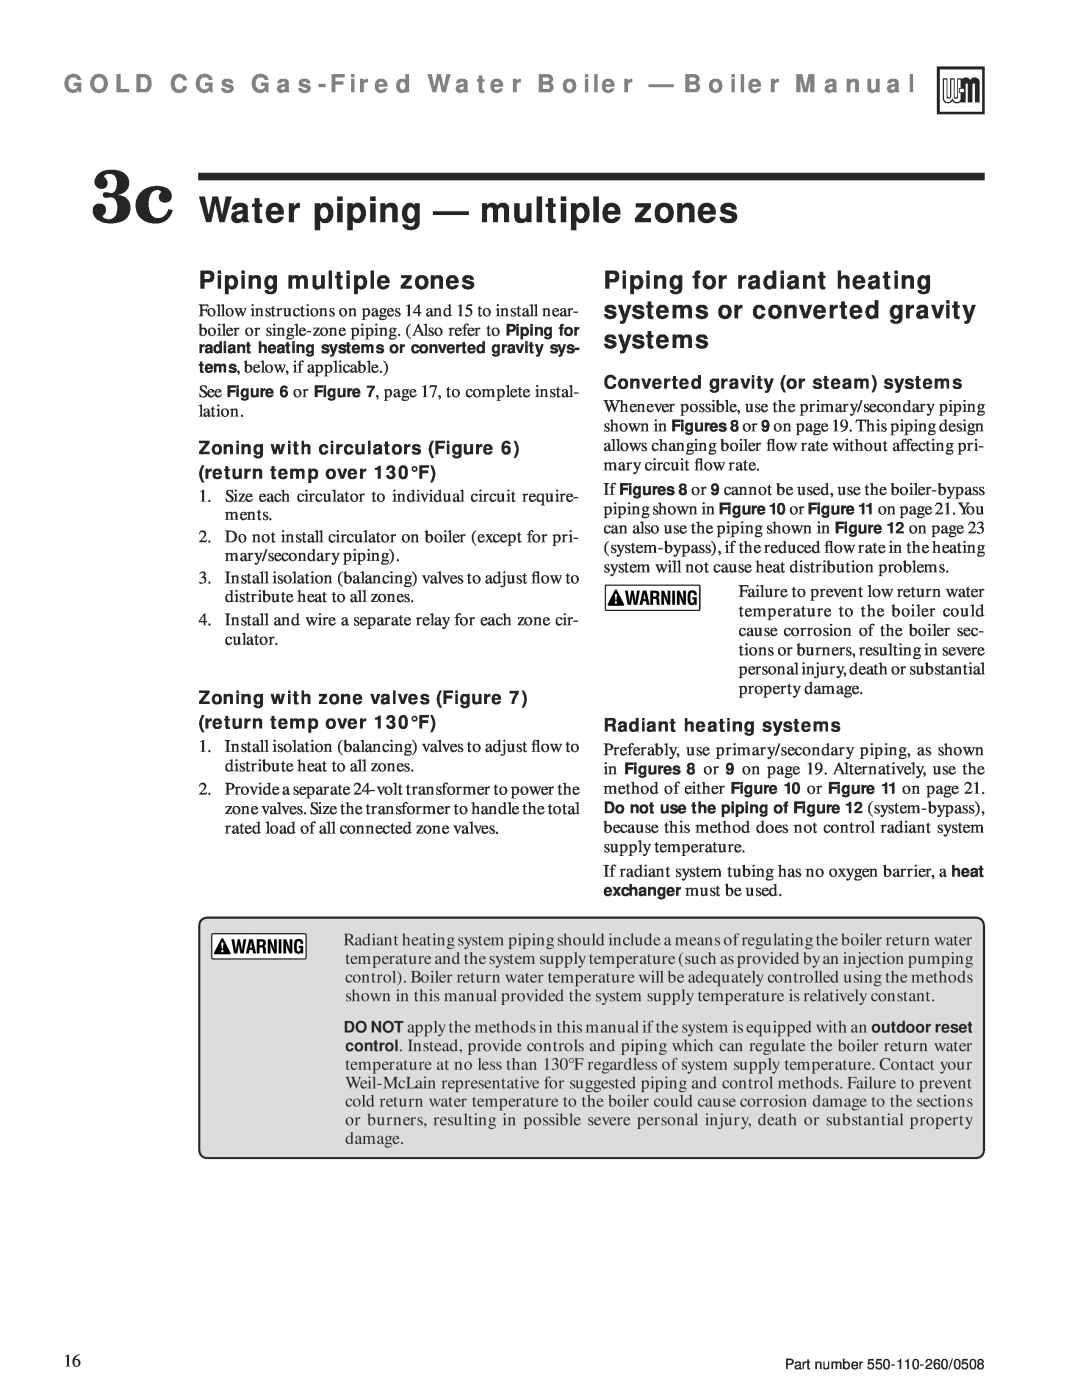 Weil-McLain 550-110-260/0508 3c Water piping — multiple zones, Piping multiple zones, Converted gravity or steam systems 